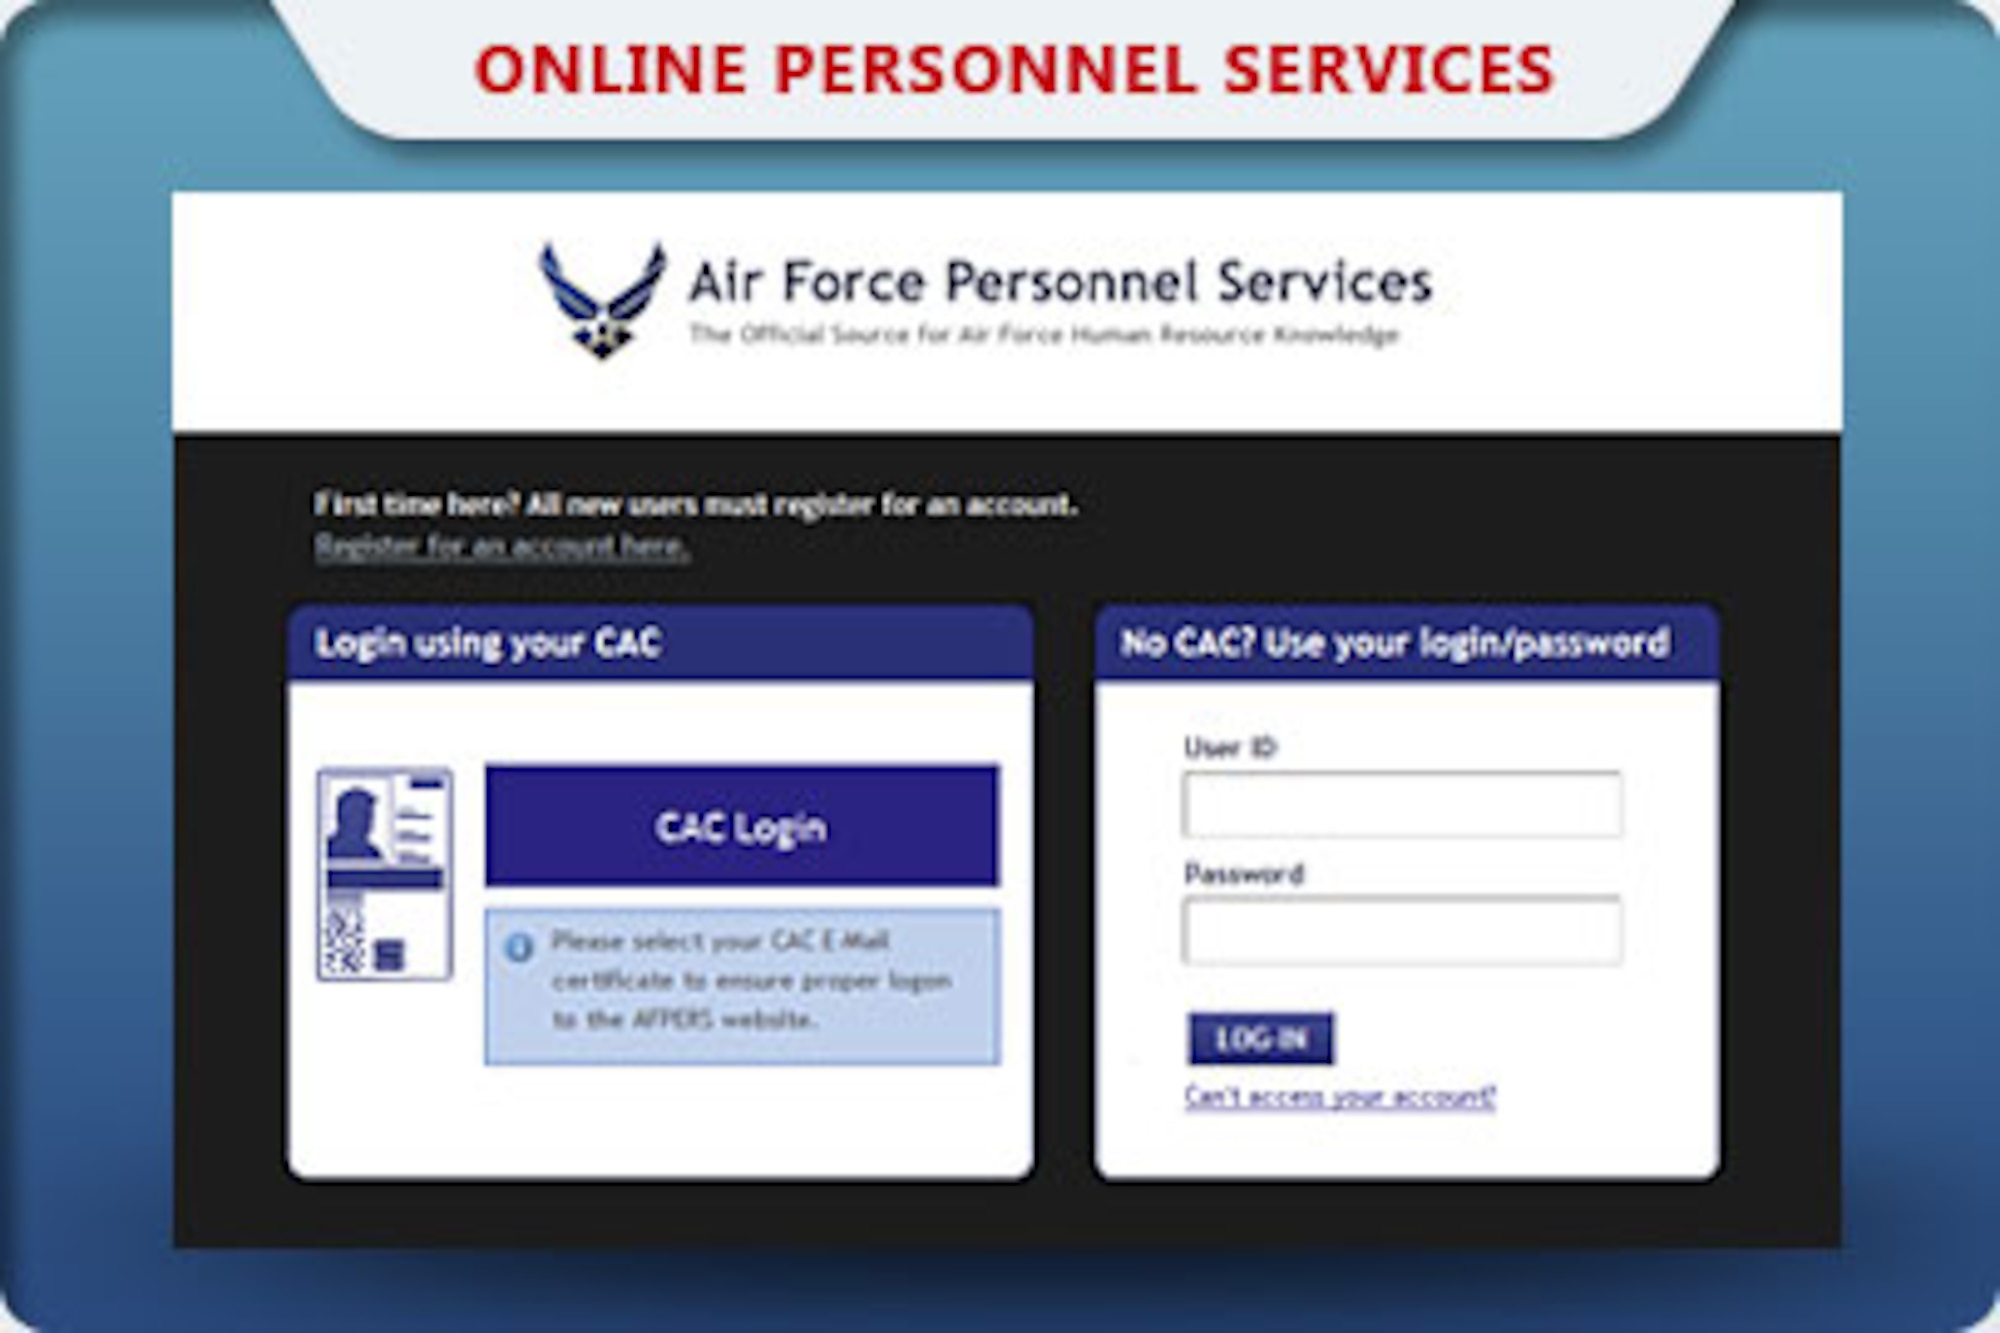 Air Force officials have refined the login requirements for the Air Force personnel services website to ensure users with expired passwords have 24-hour, seven-days-a-week access to the website without communications restrictions using a common access card. 